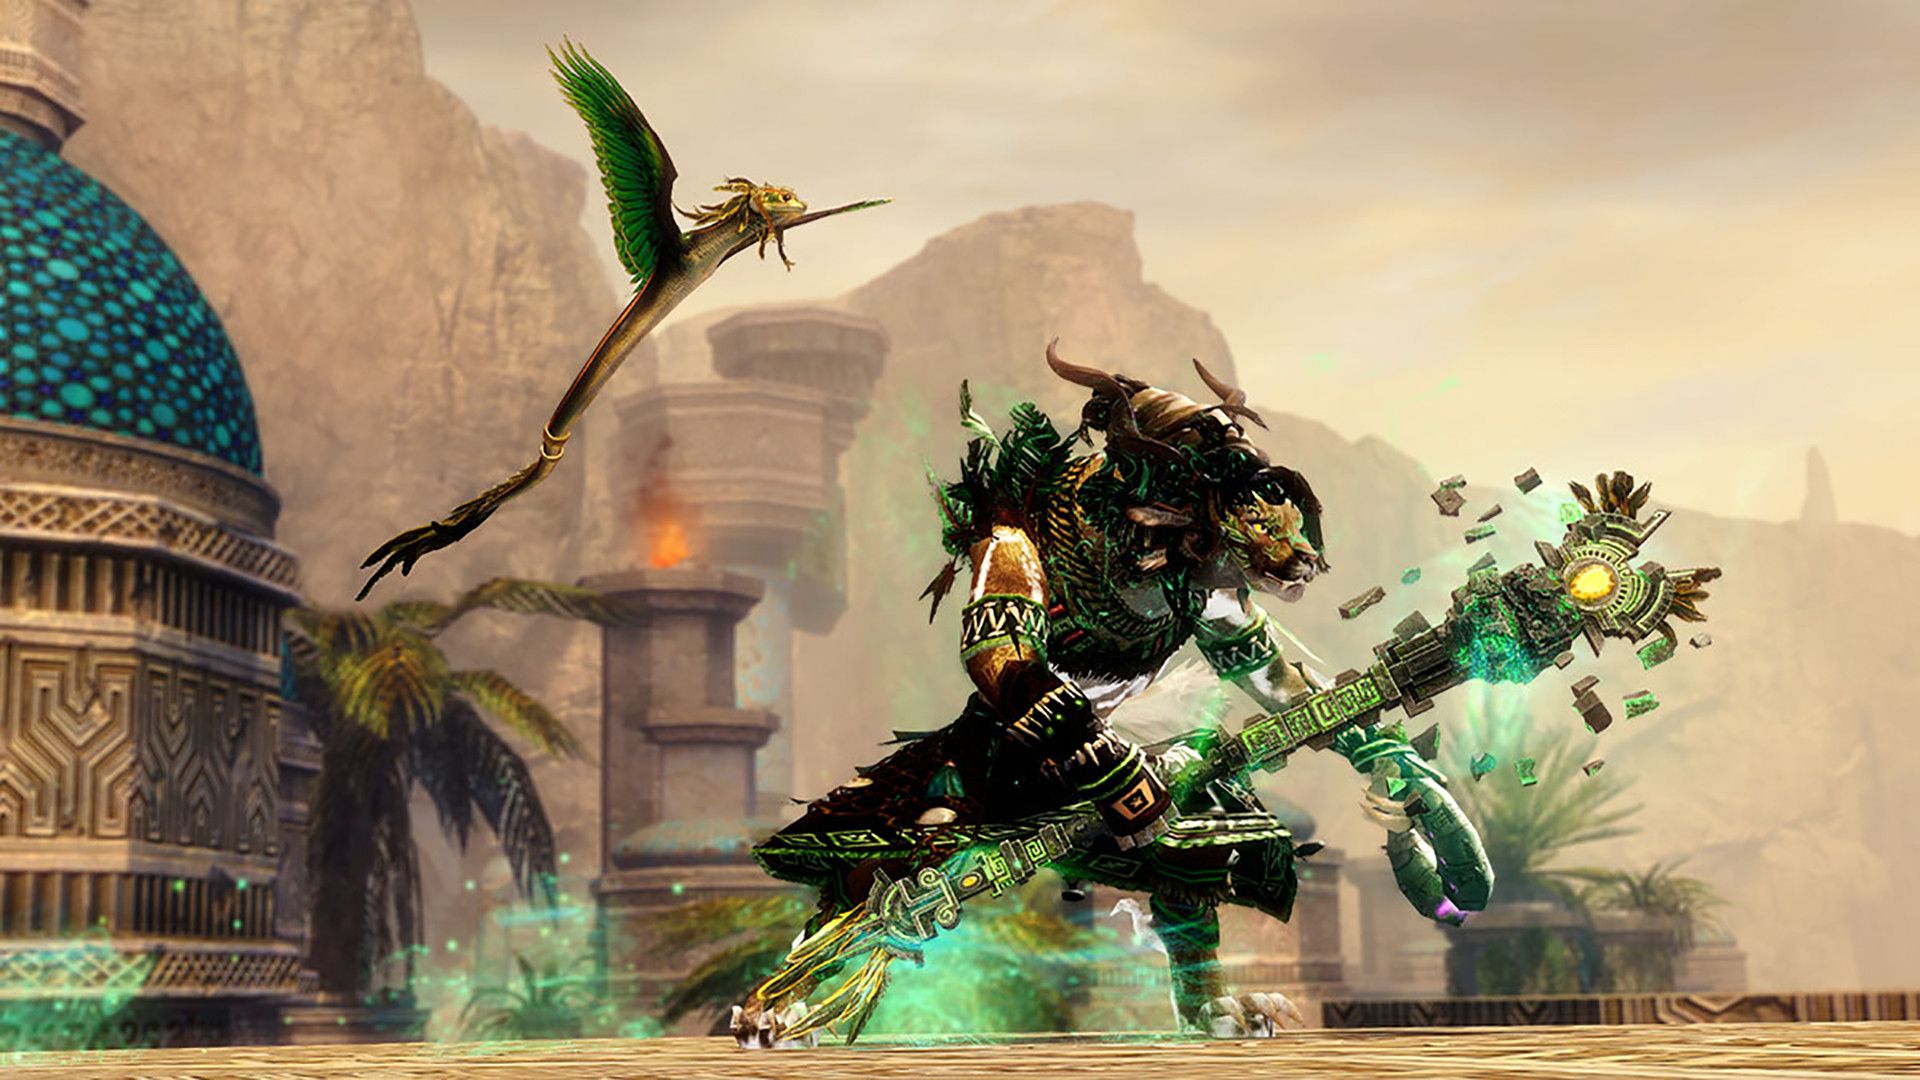 If you want to learn how to create your own legendary ring Conflux from World vs World, this GW2 Conflux legendary ring guide is just the thing for you.